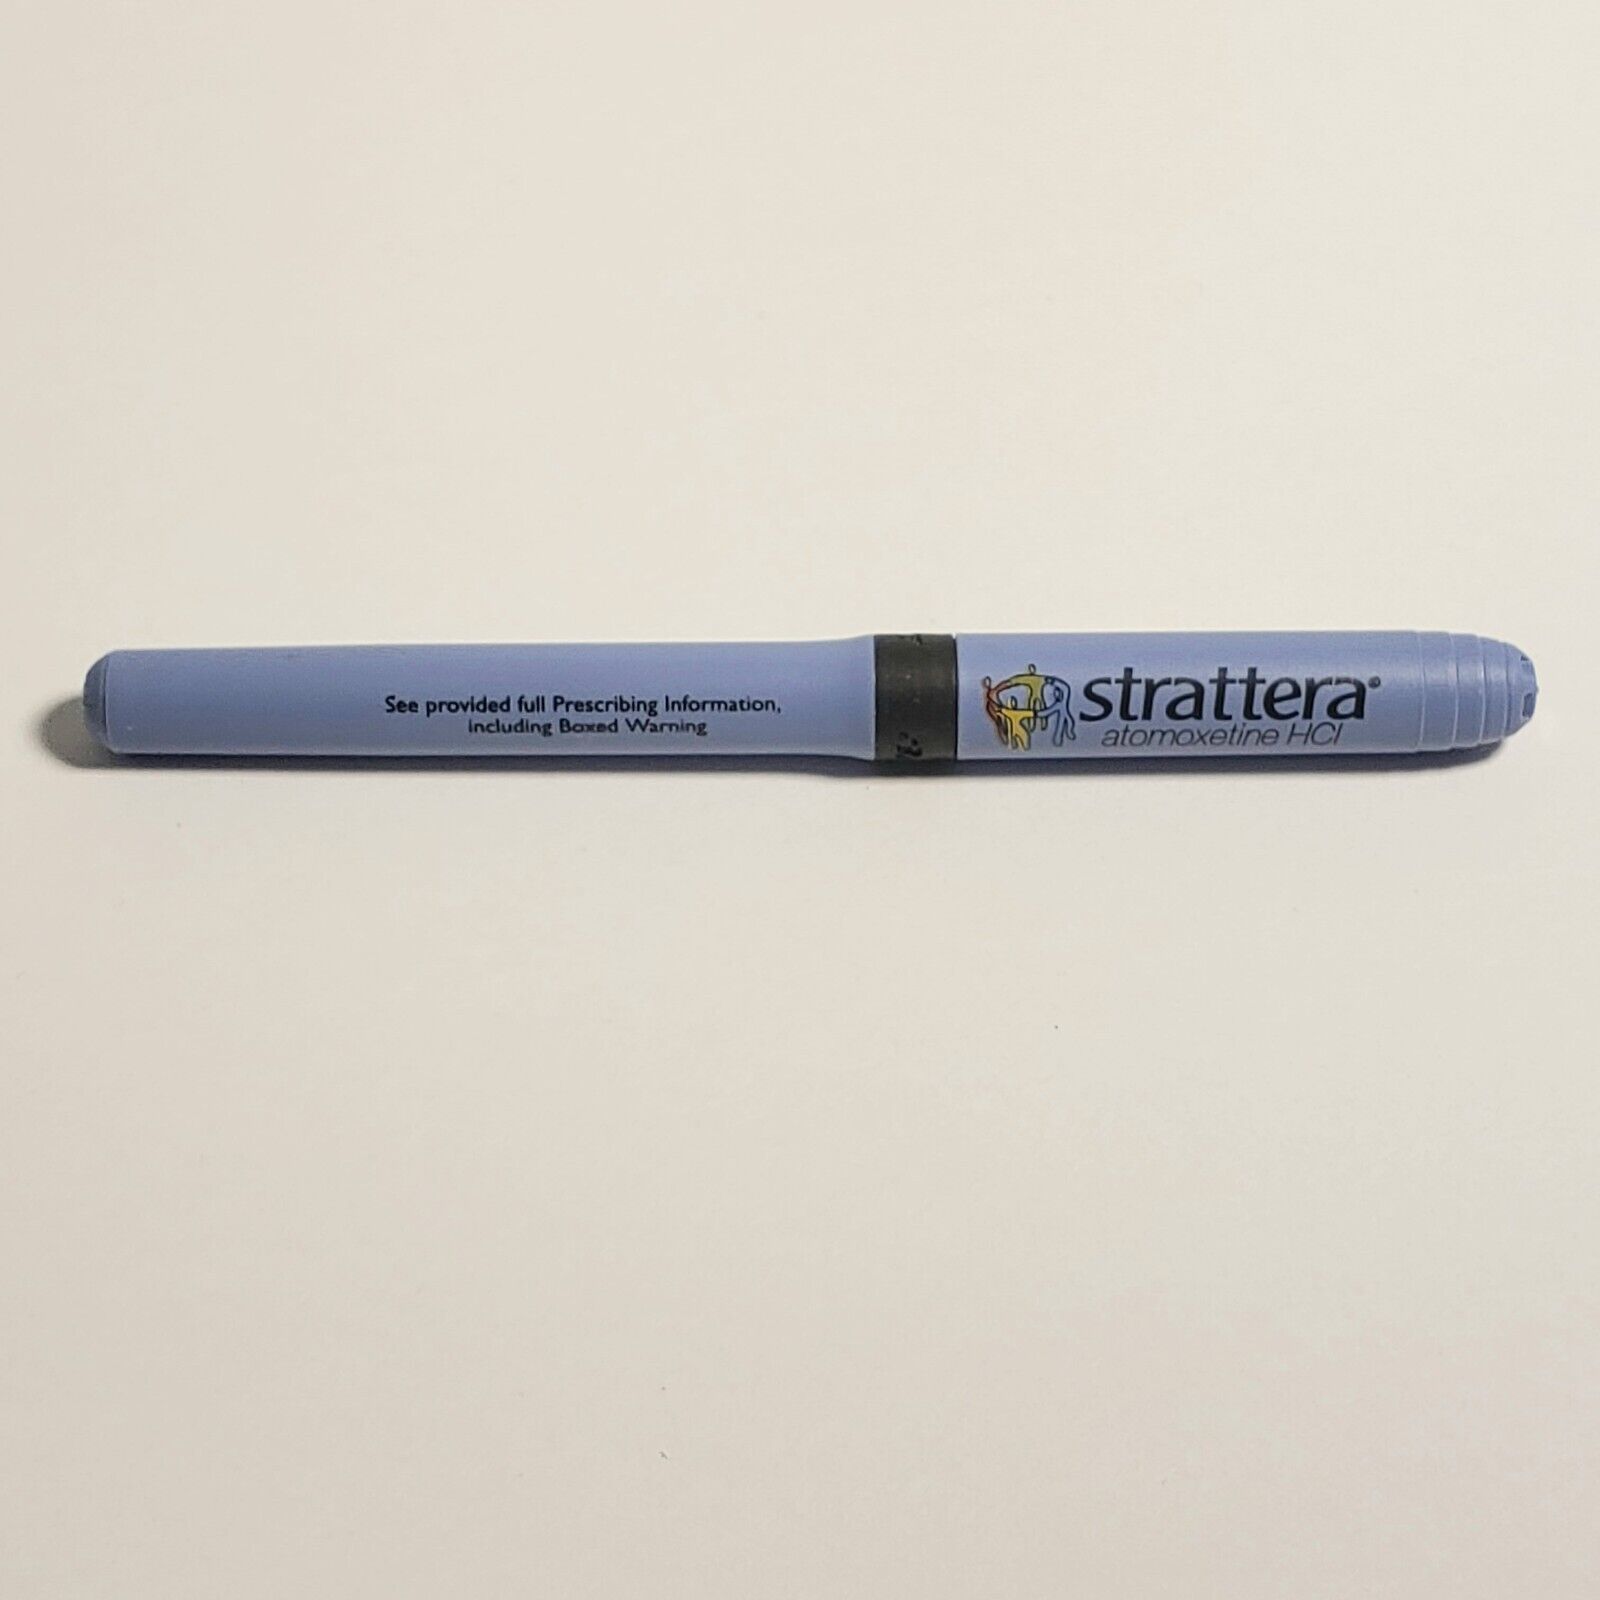 Strattera BIC Pharmaceutical Plastic Drug Rep Pen *HARD TO FIND*